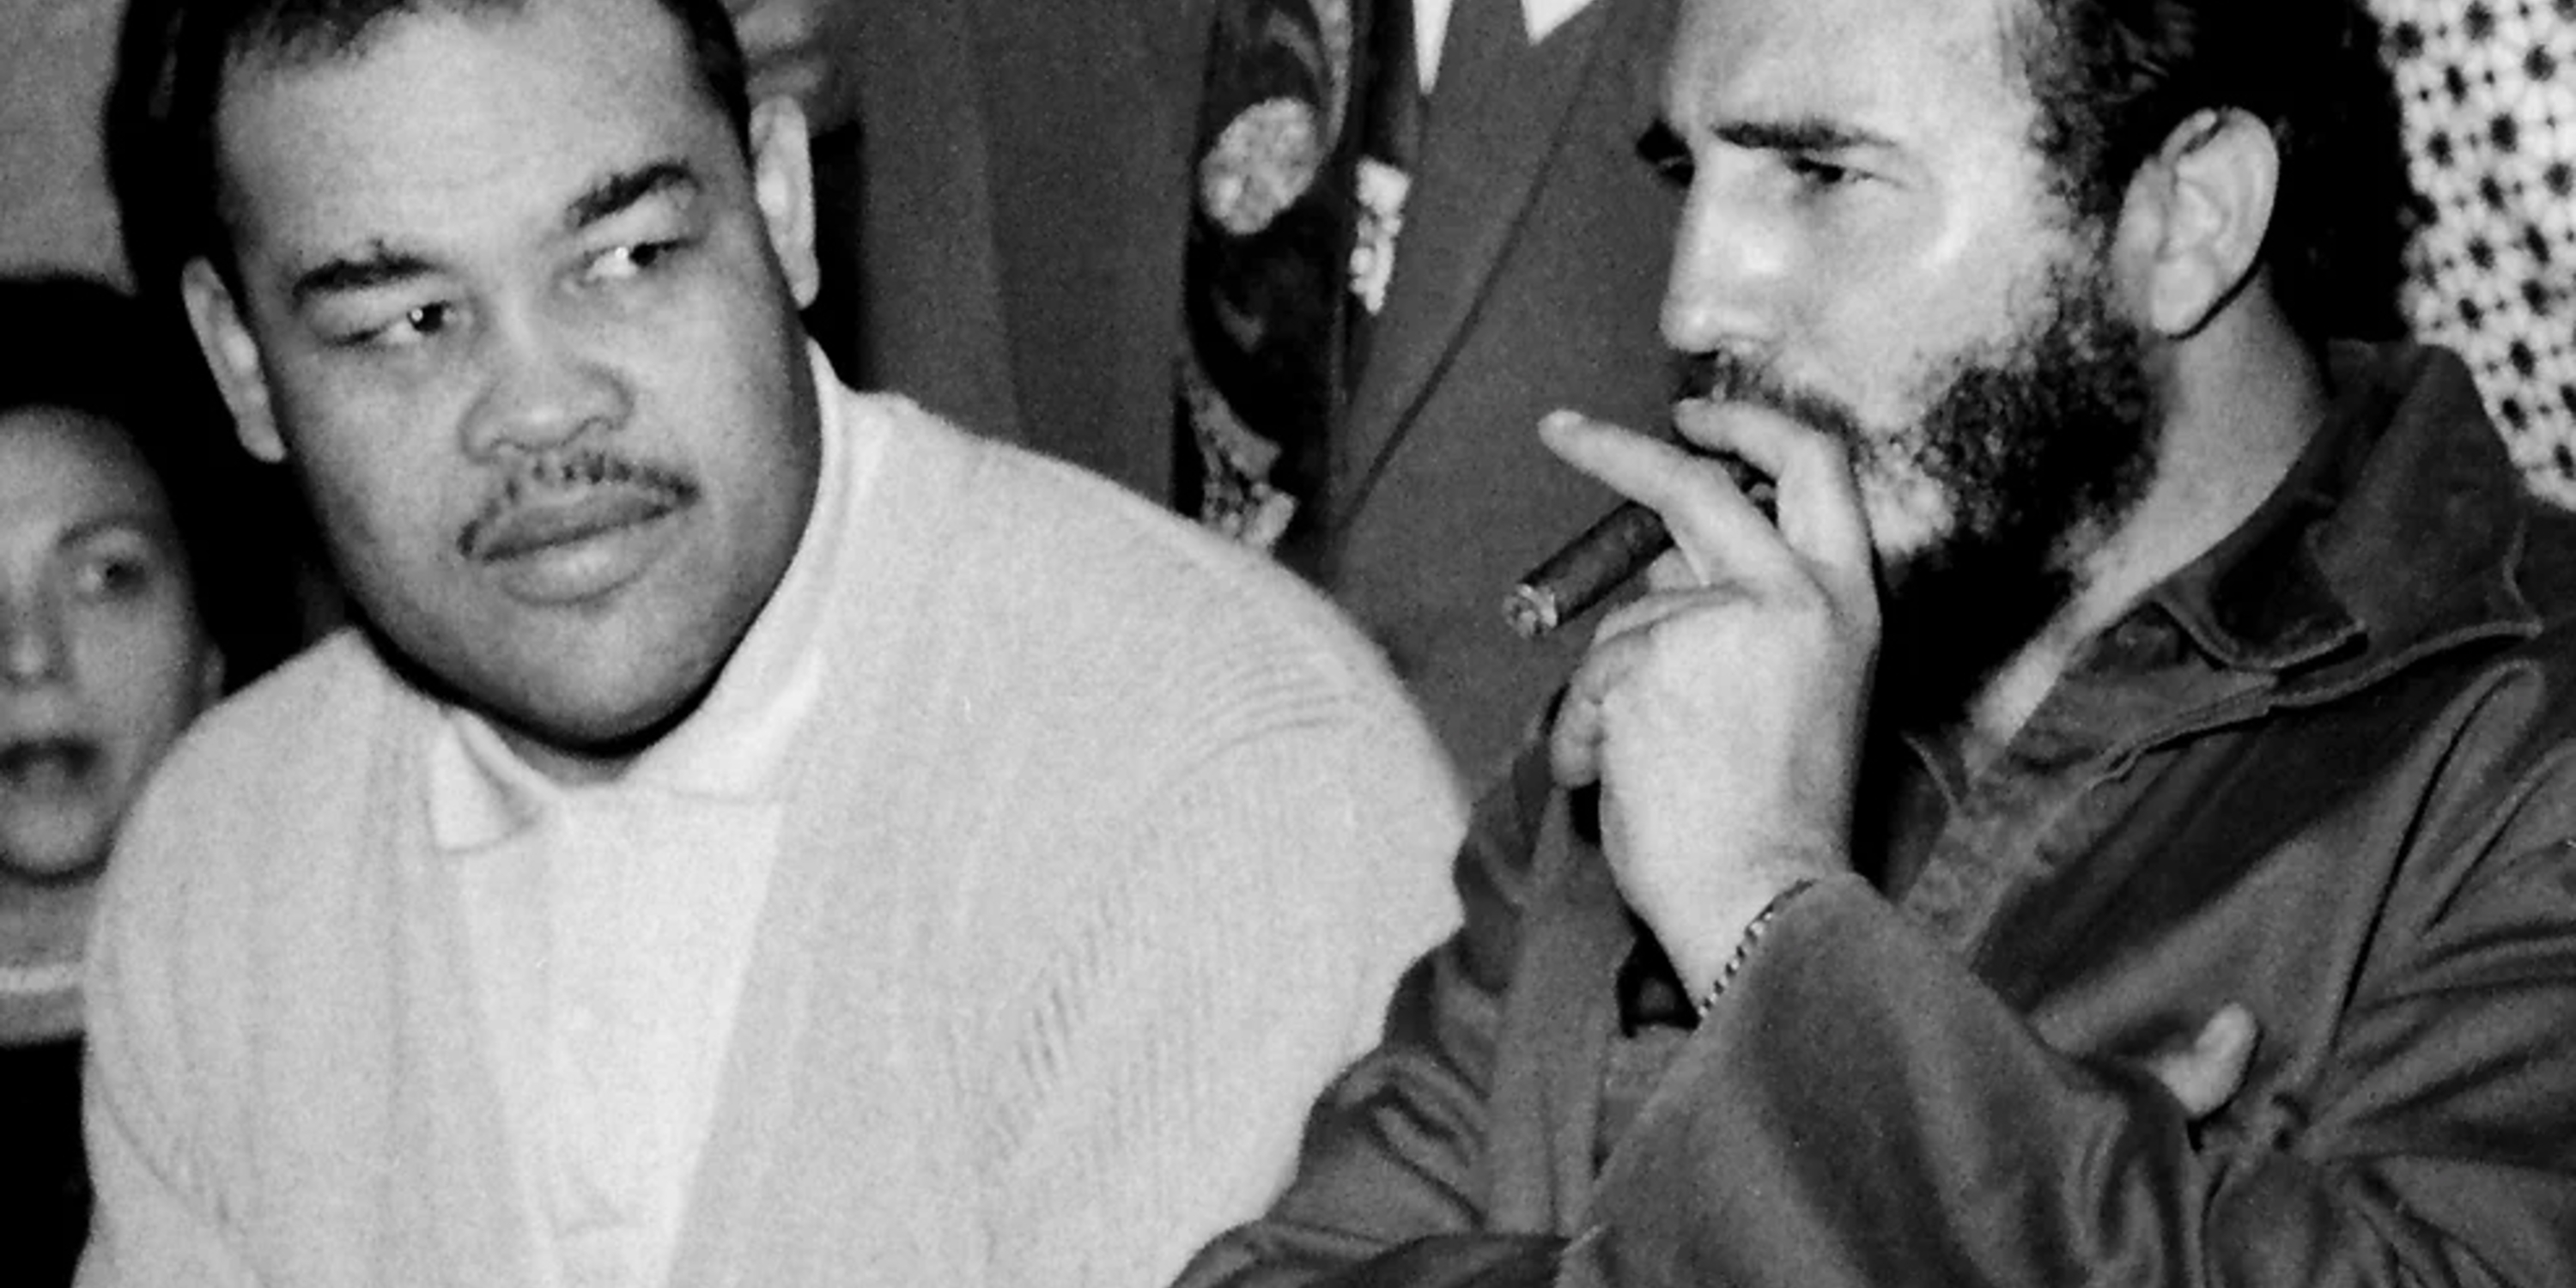 L to R - Boxer Joe Louis and Fidel Castro - Photo by Robert Abbott Sengstacke/Archive Photos/Getty Images